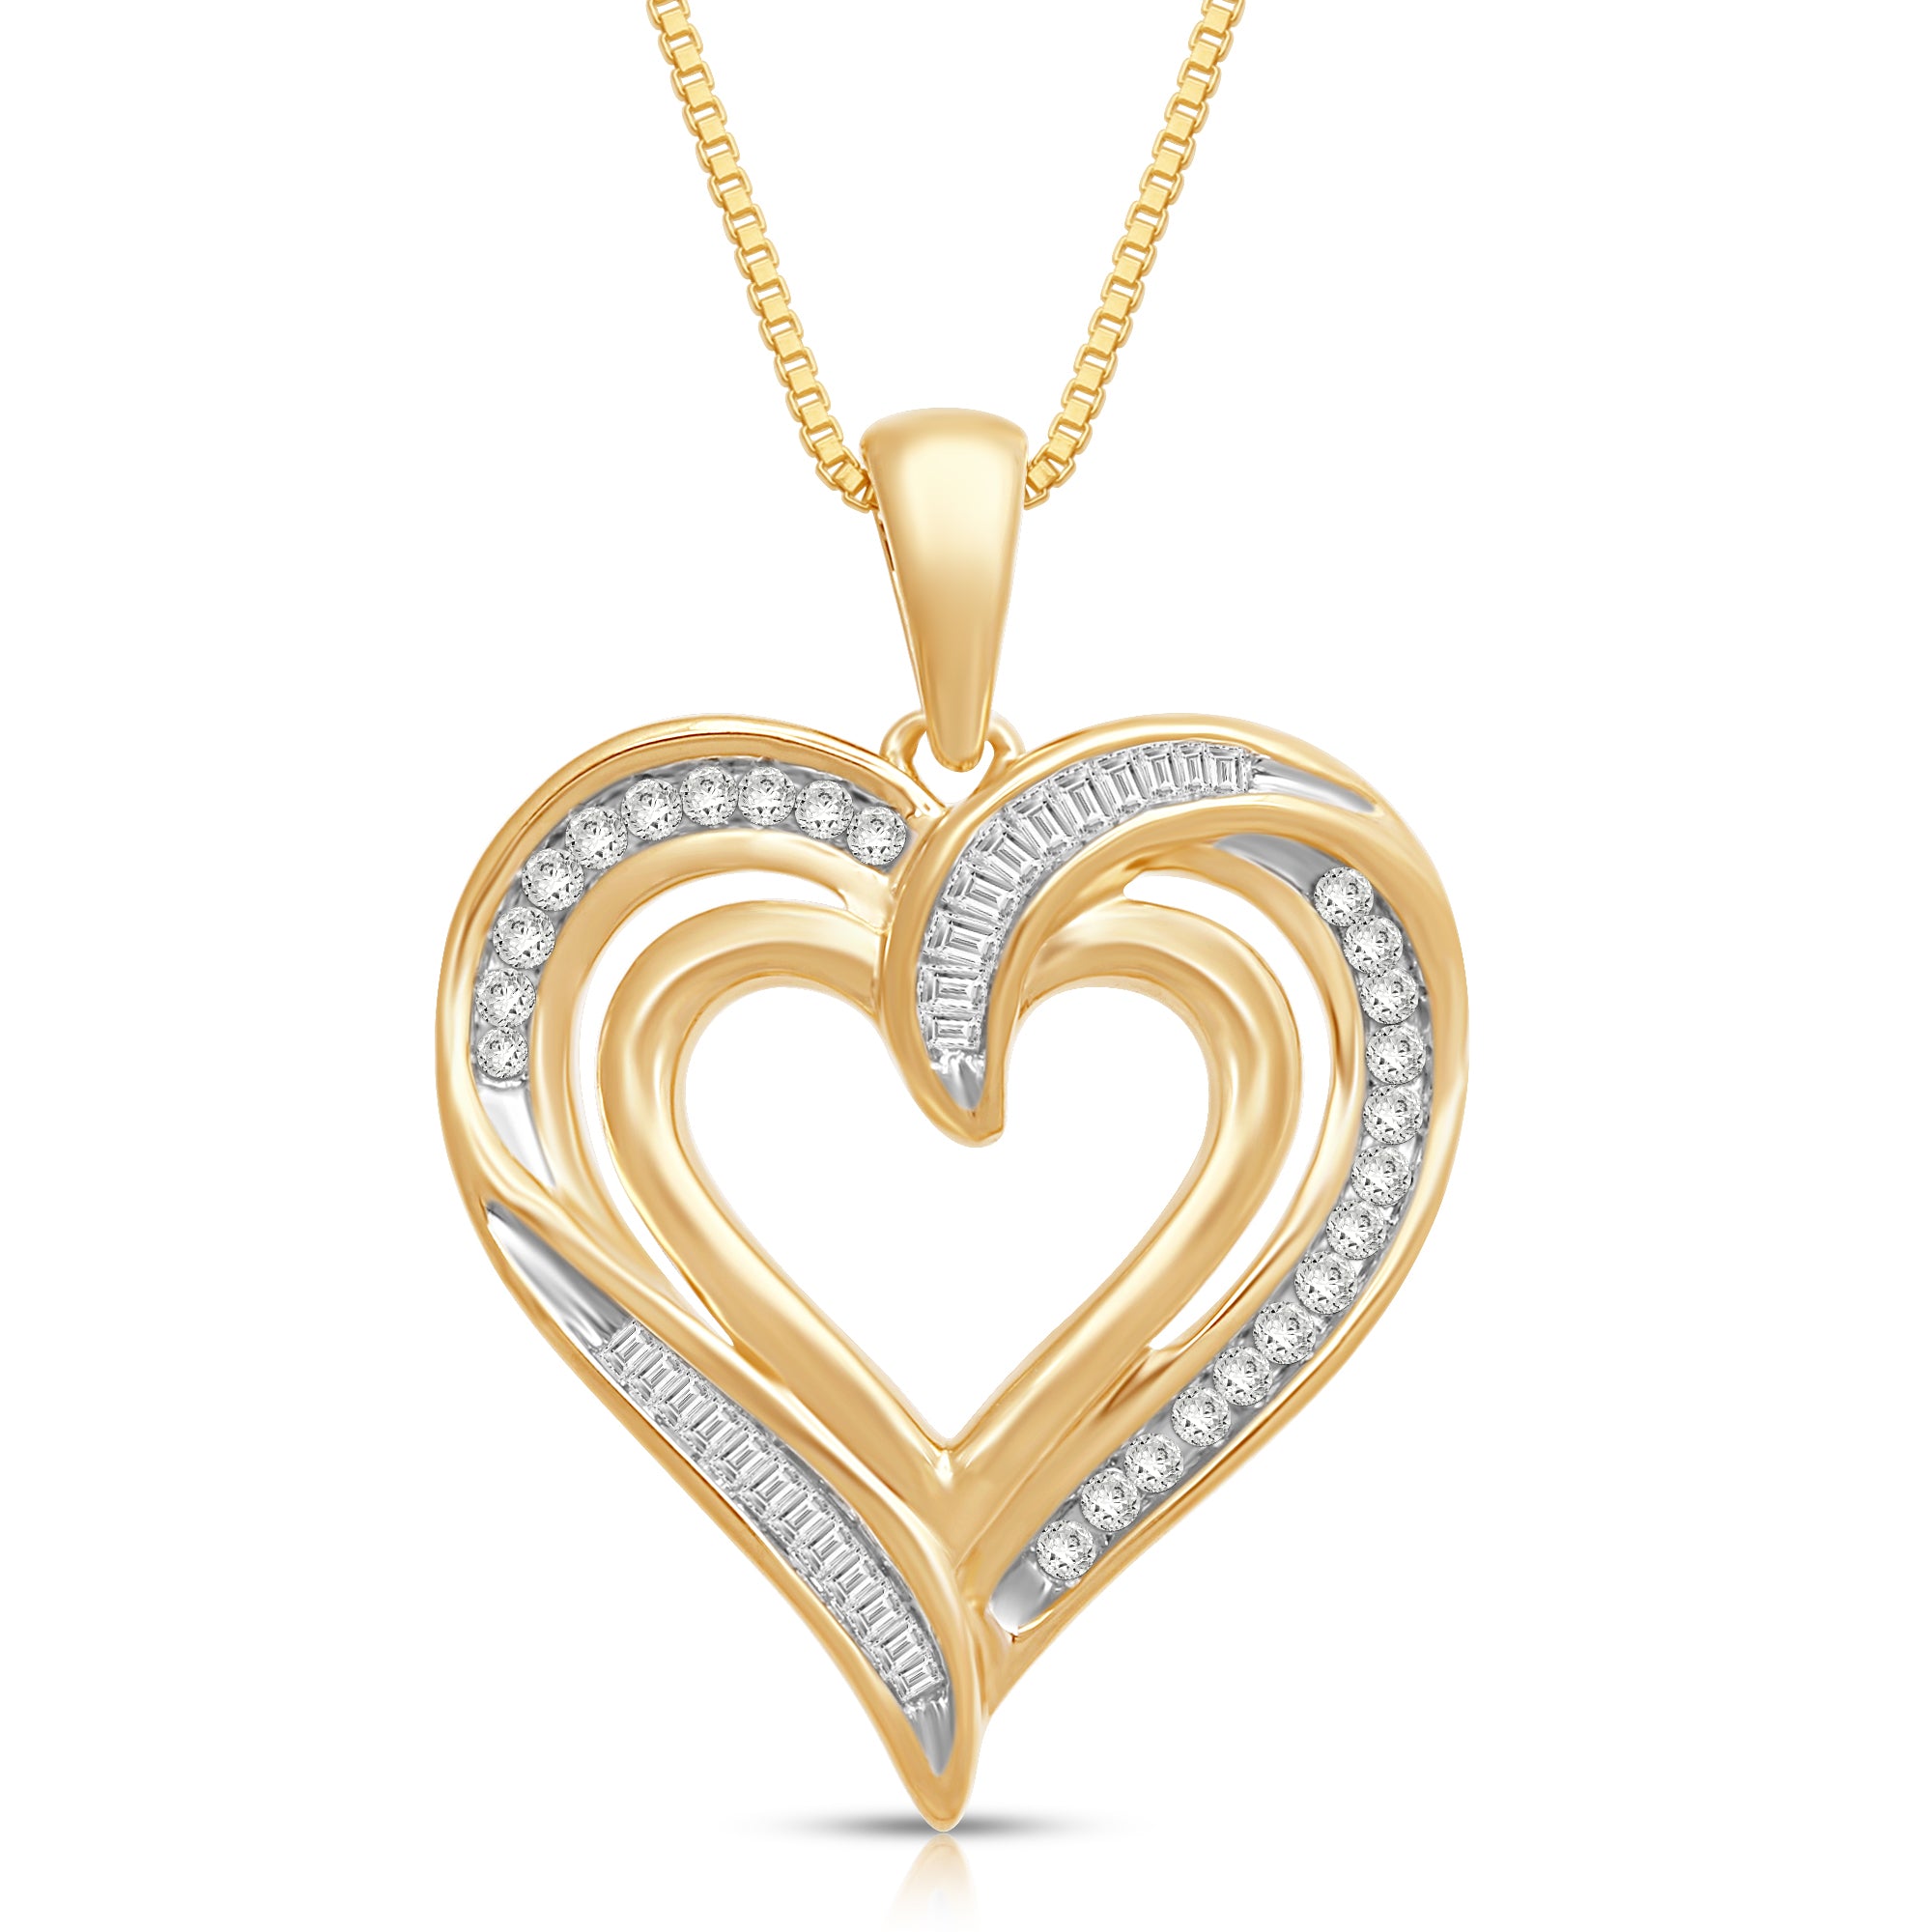 Gold necklace with heart shape pendant and pink Zircons - JoyElly